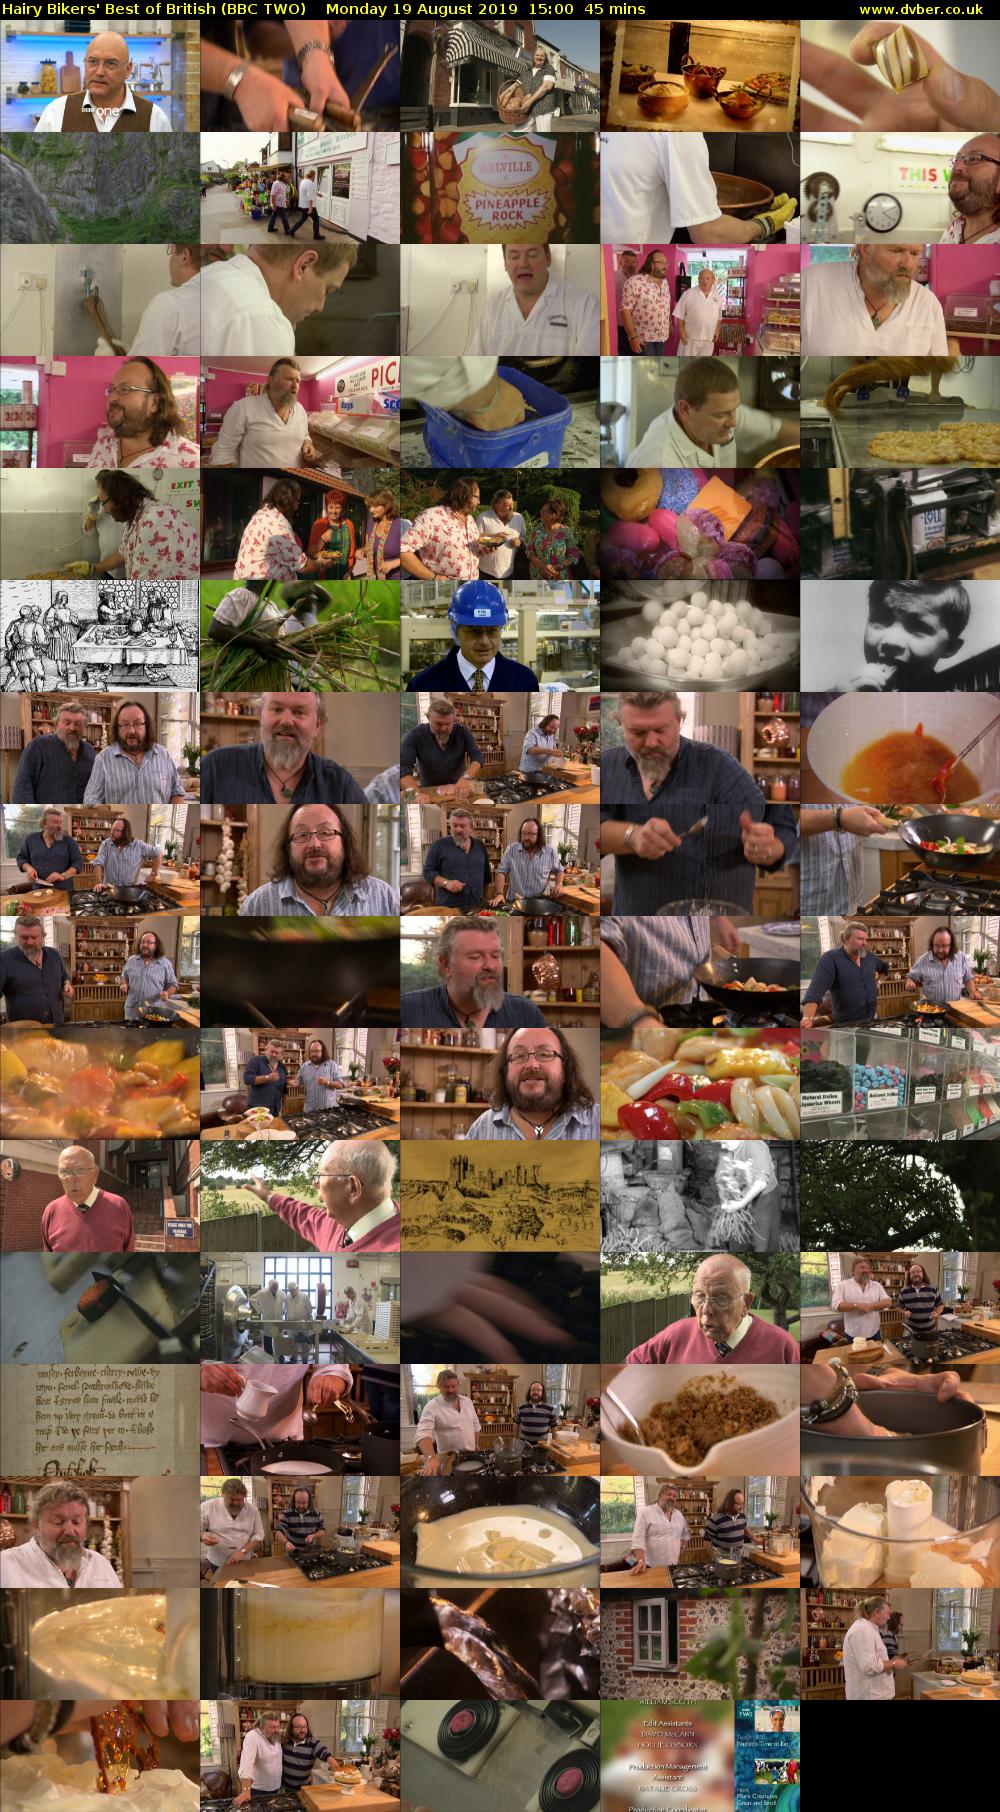 Hairy Bikers' Best of British (BBC TWO) Monday 19 August 2019 15:00 - 15:45